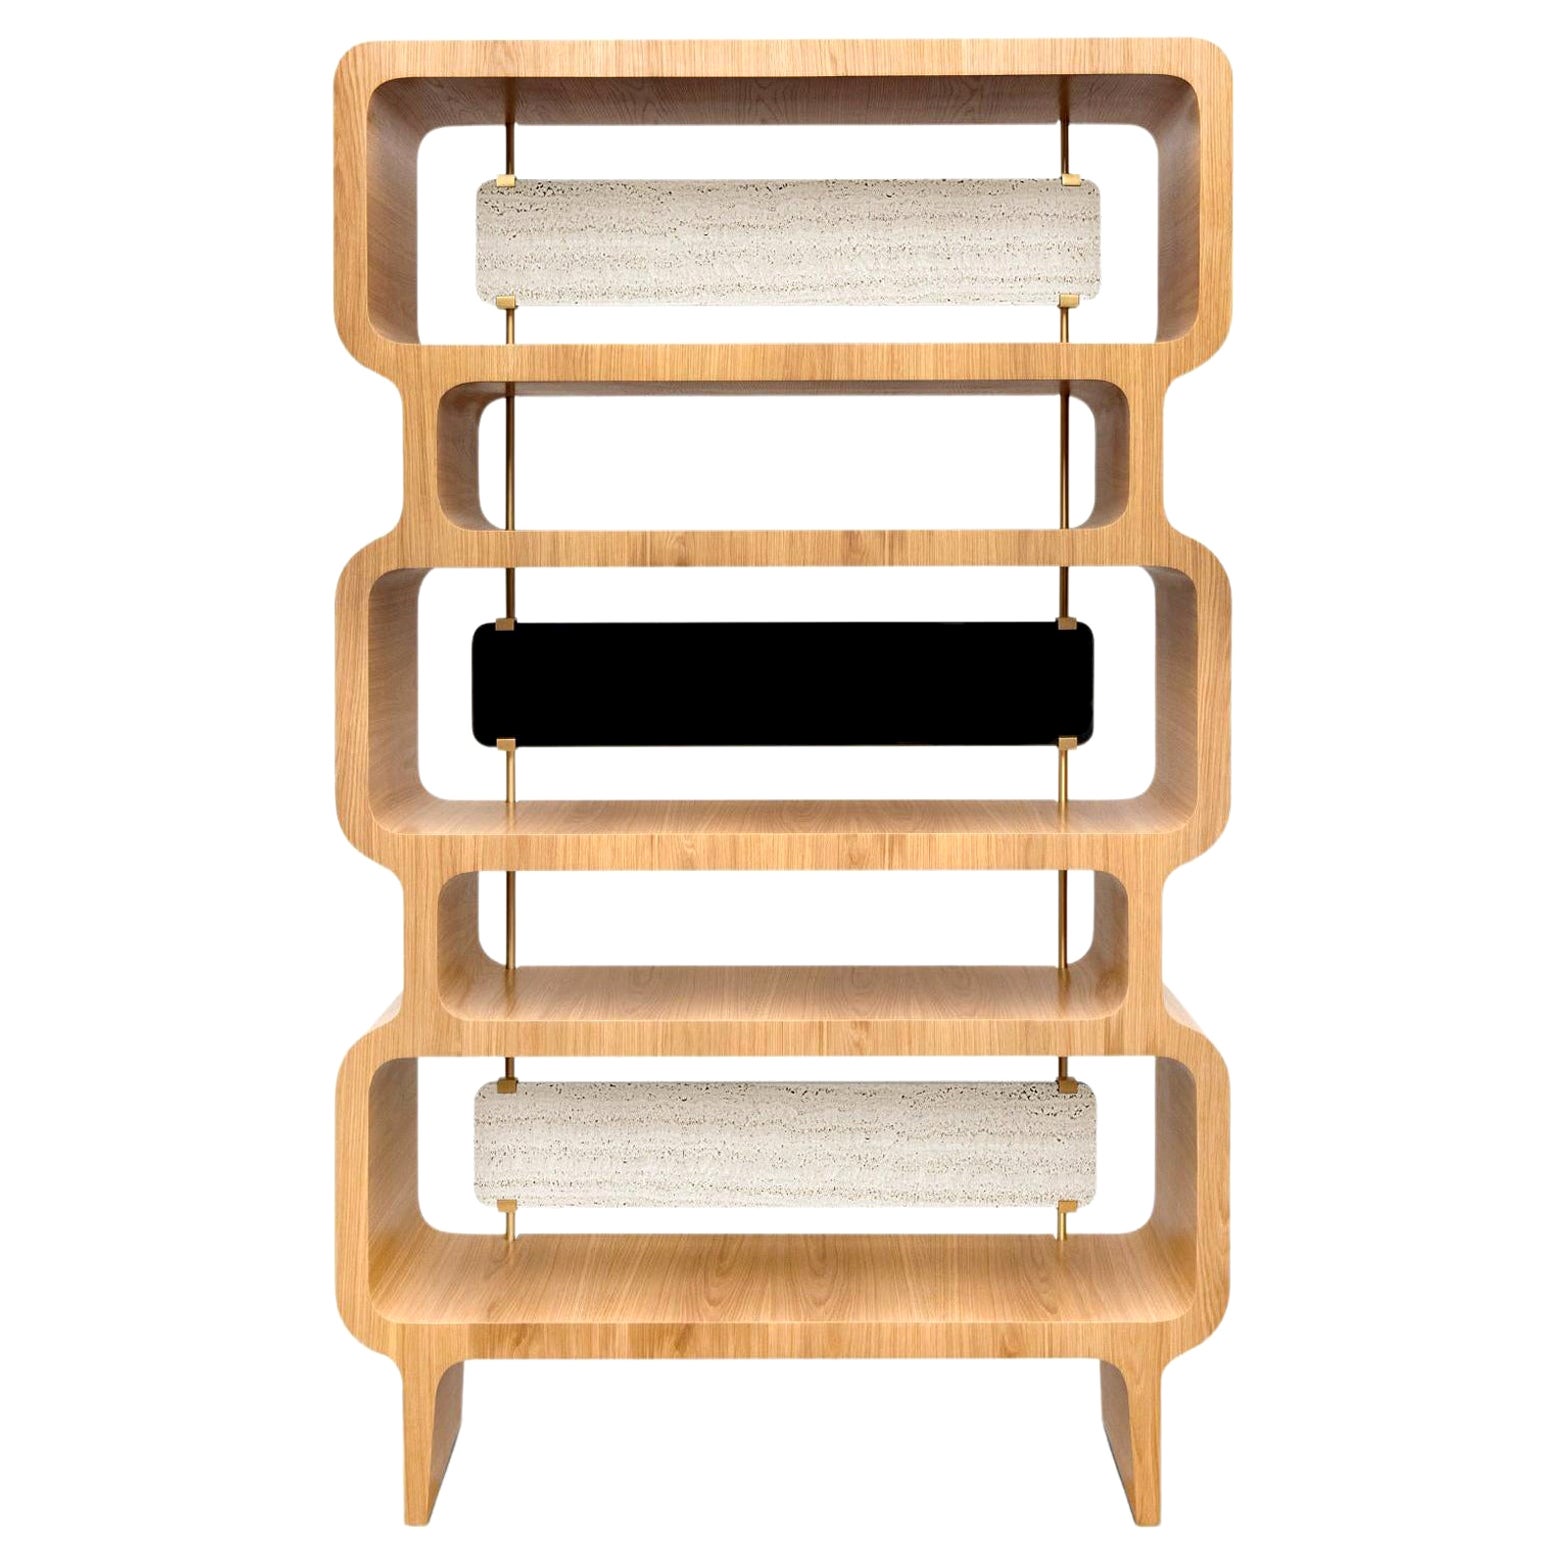 Copacabana Bookcase, Natural Oak and Travertine Details, Handcrafted by Duistt For Sale